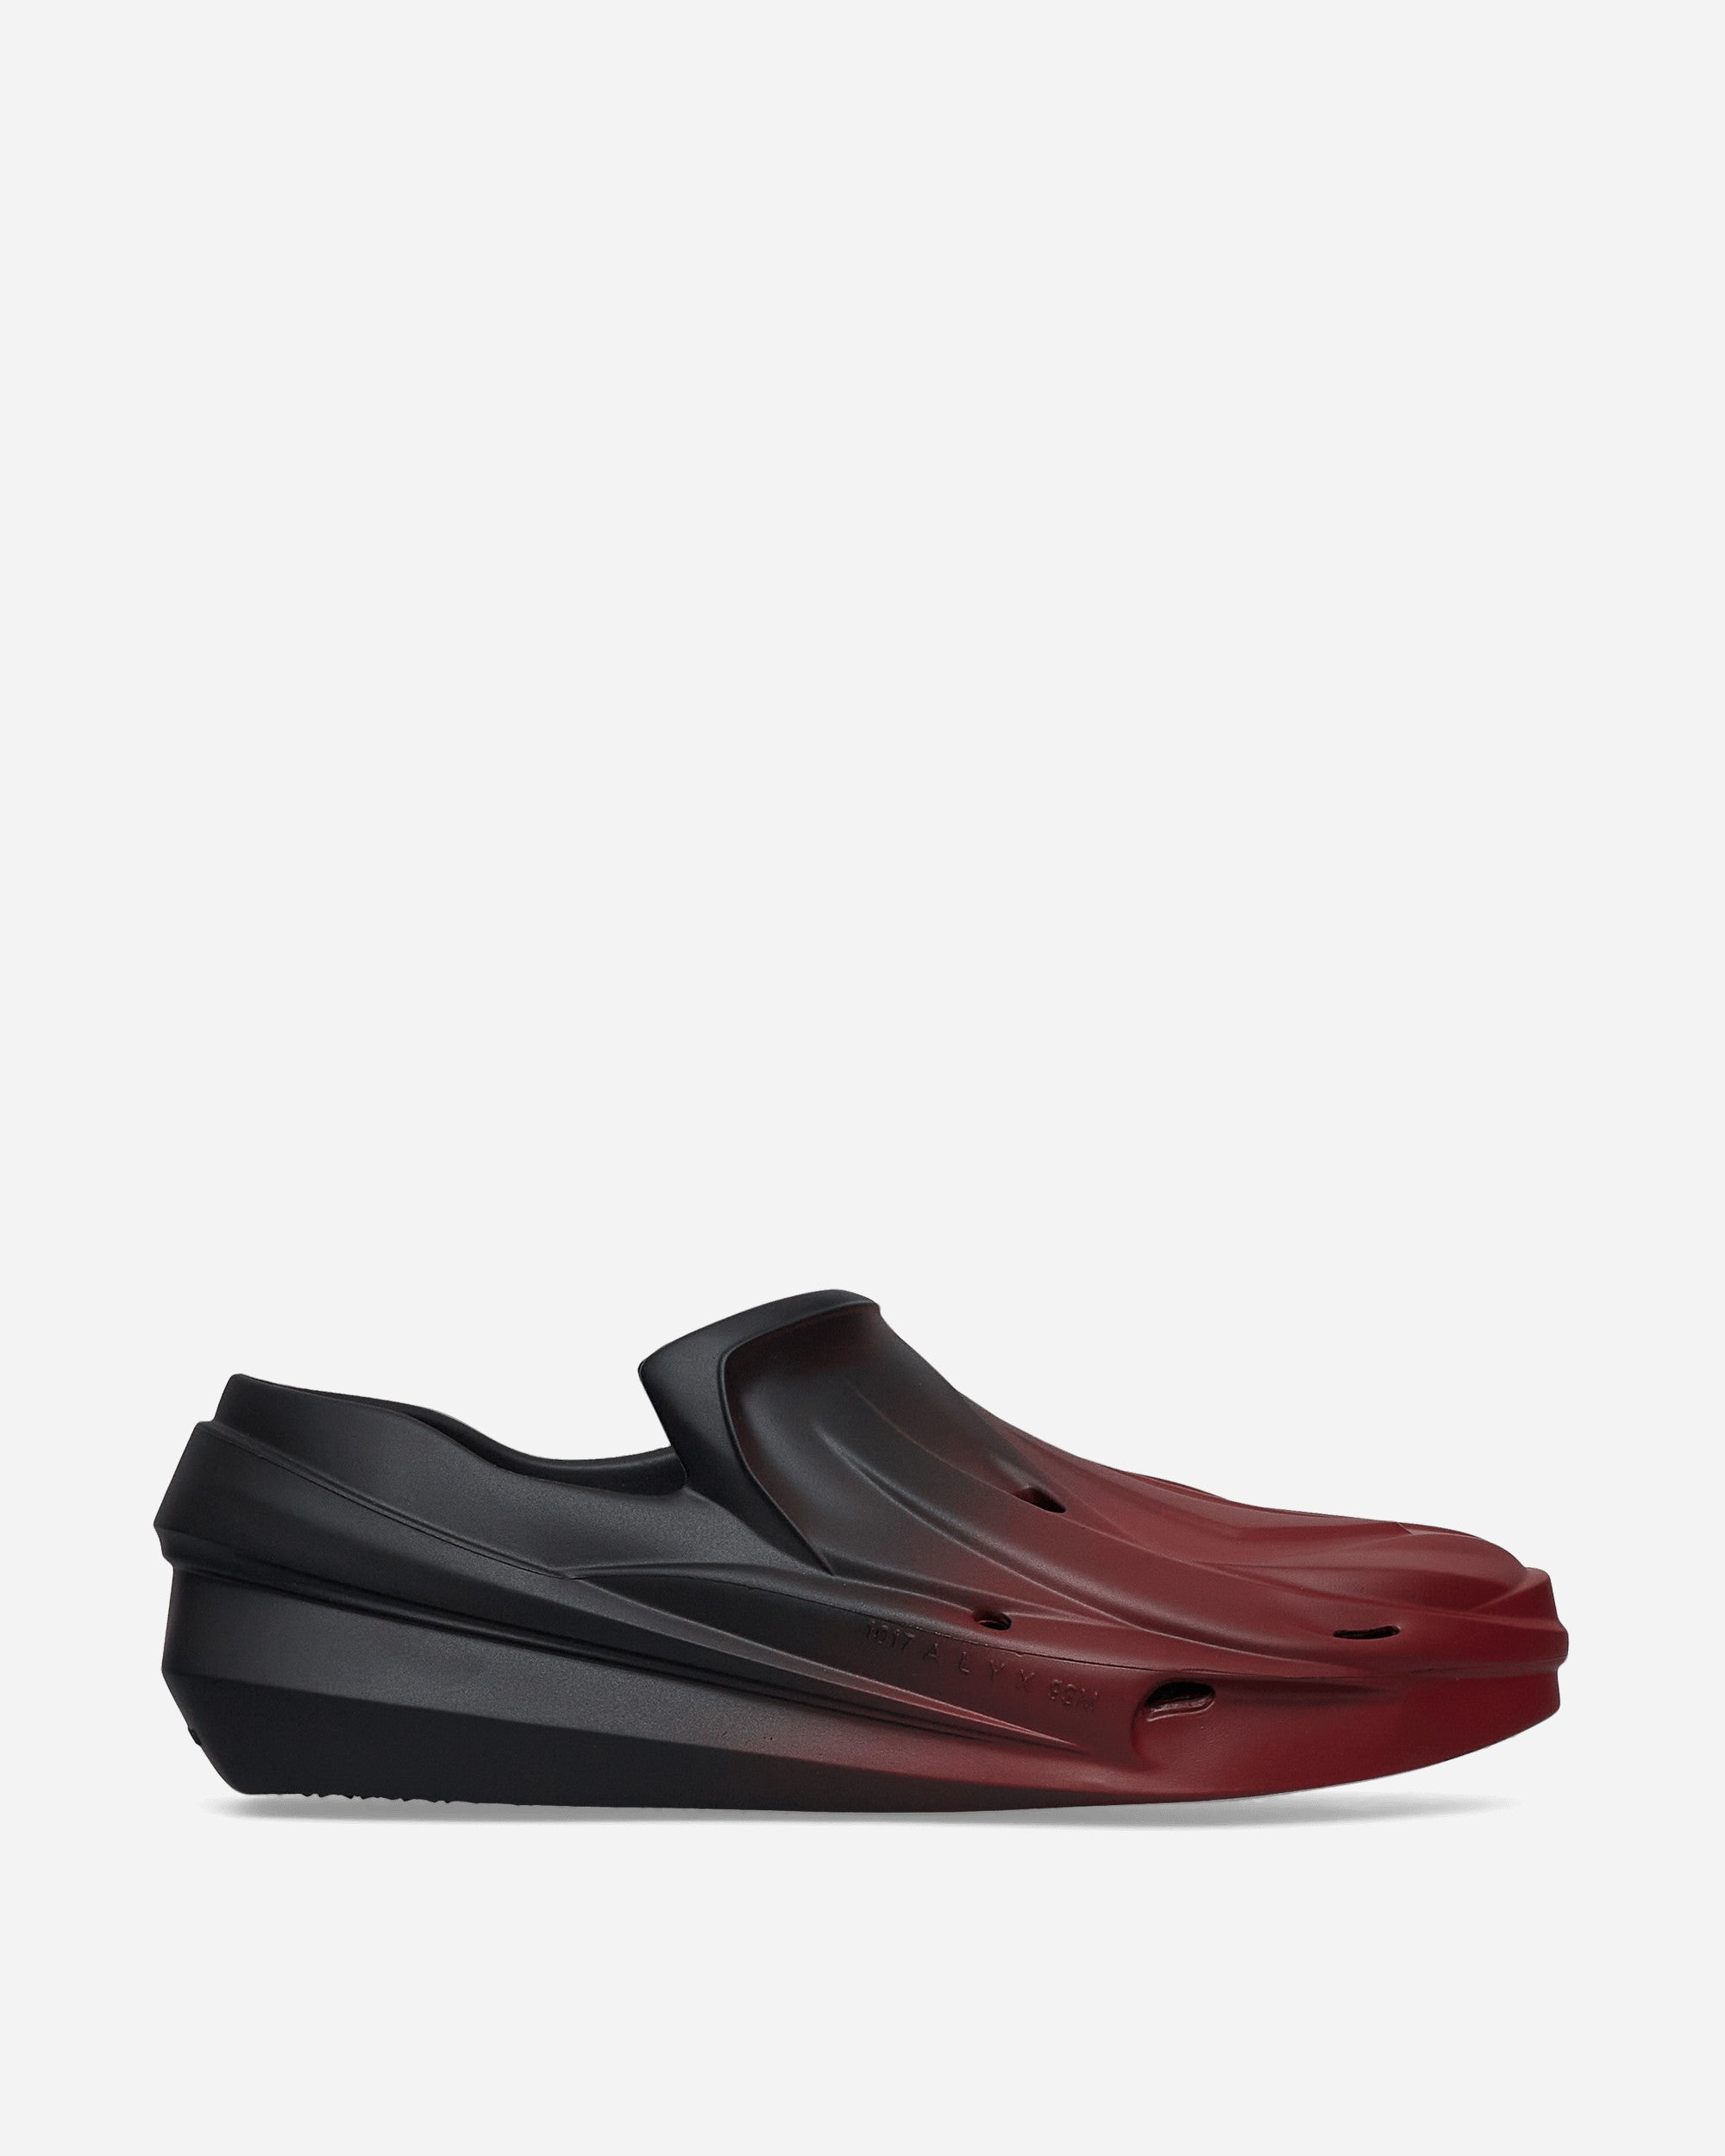 1017 ALYX 9SM Exclusive Mono Slip On Red - Slam Jam® Official Store